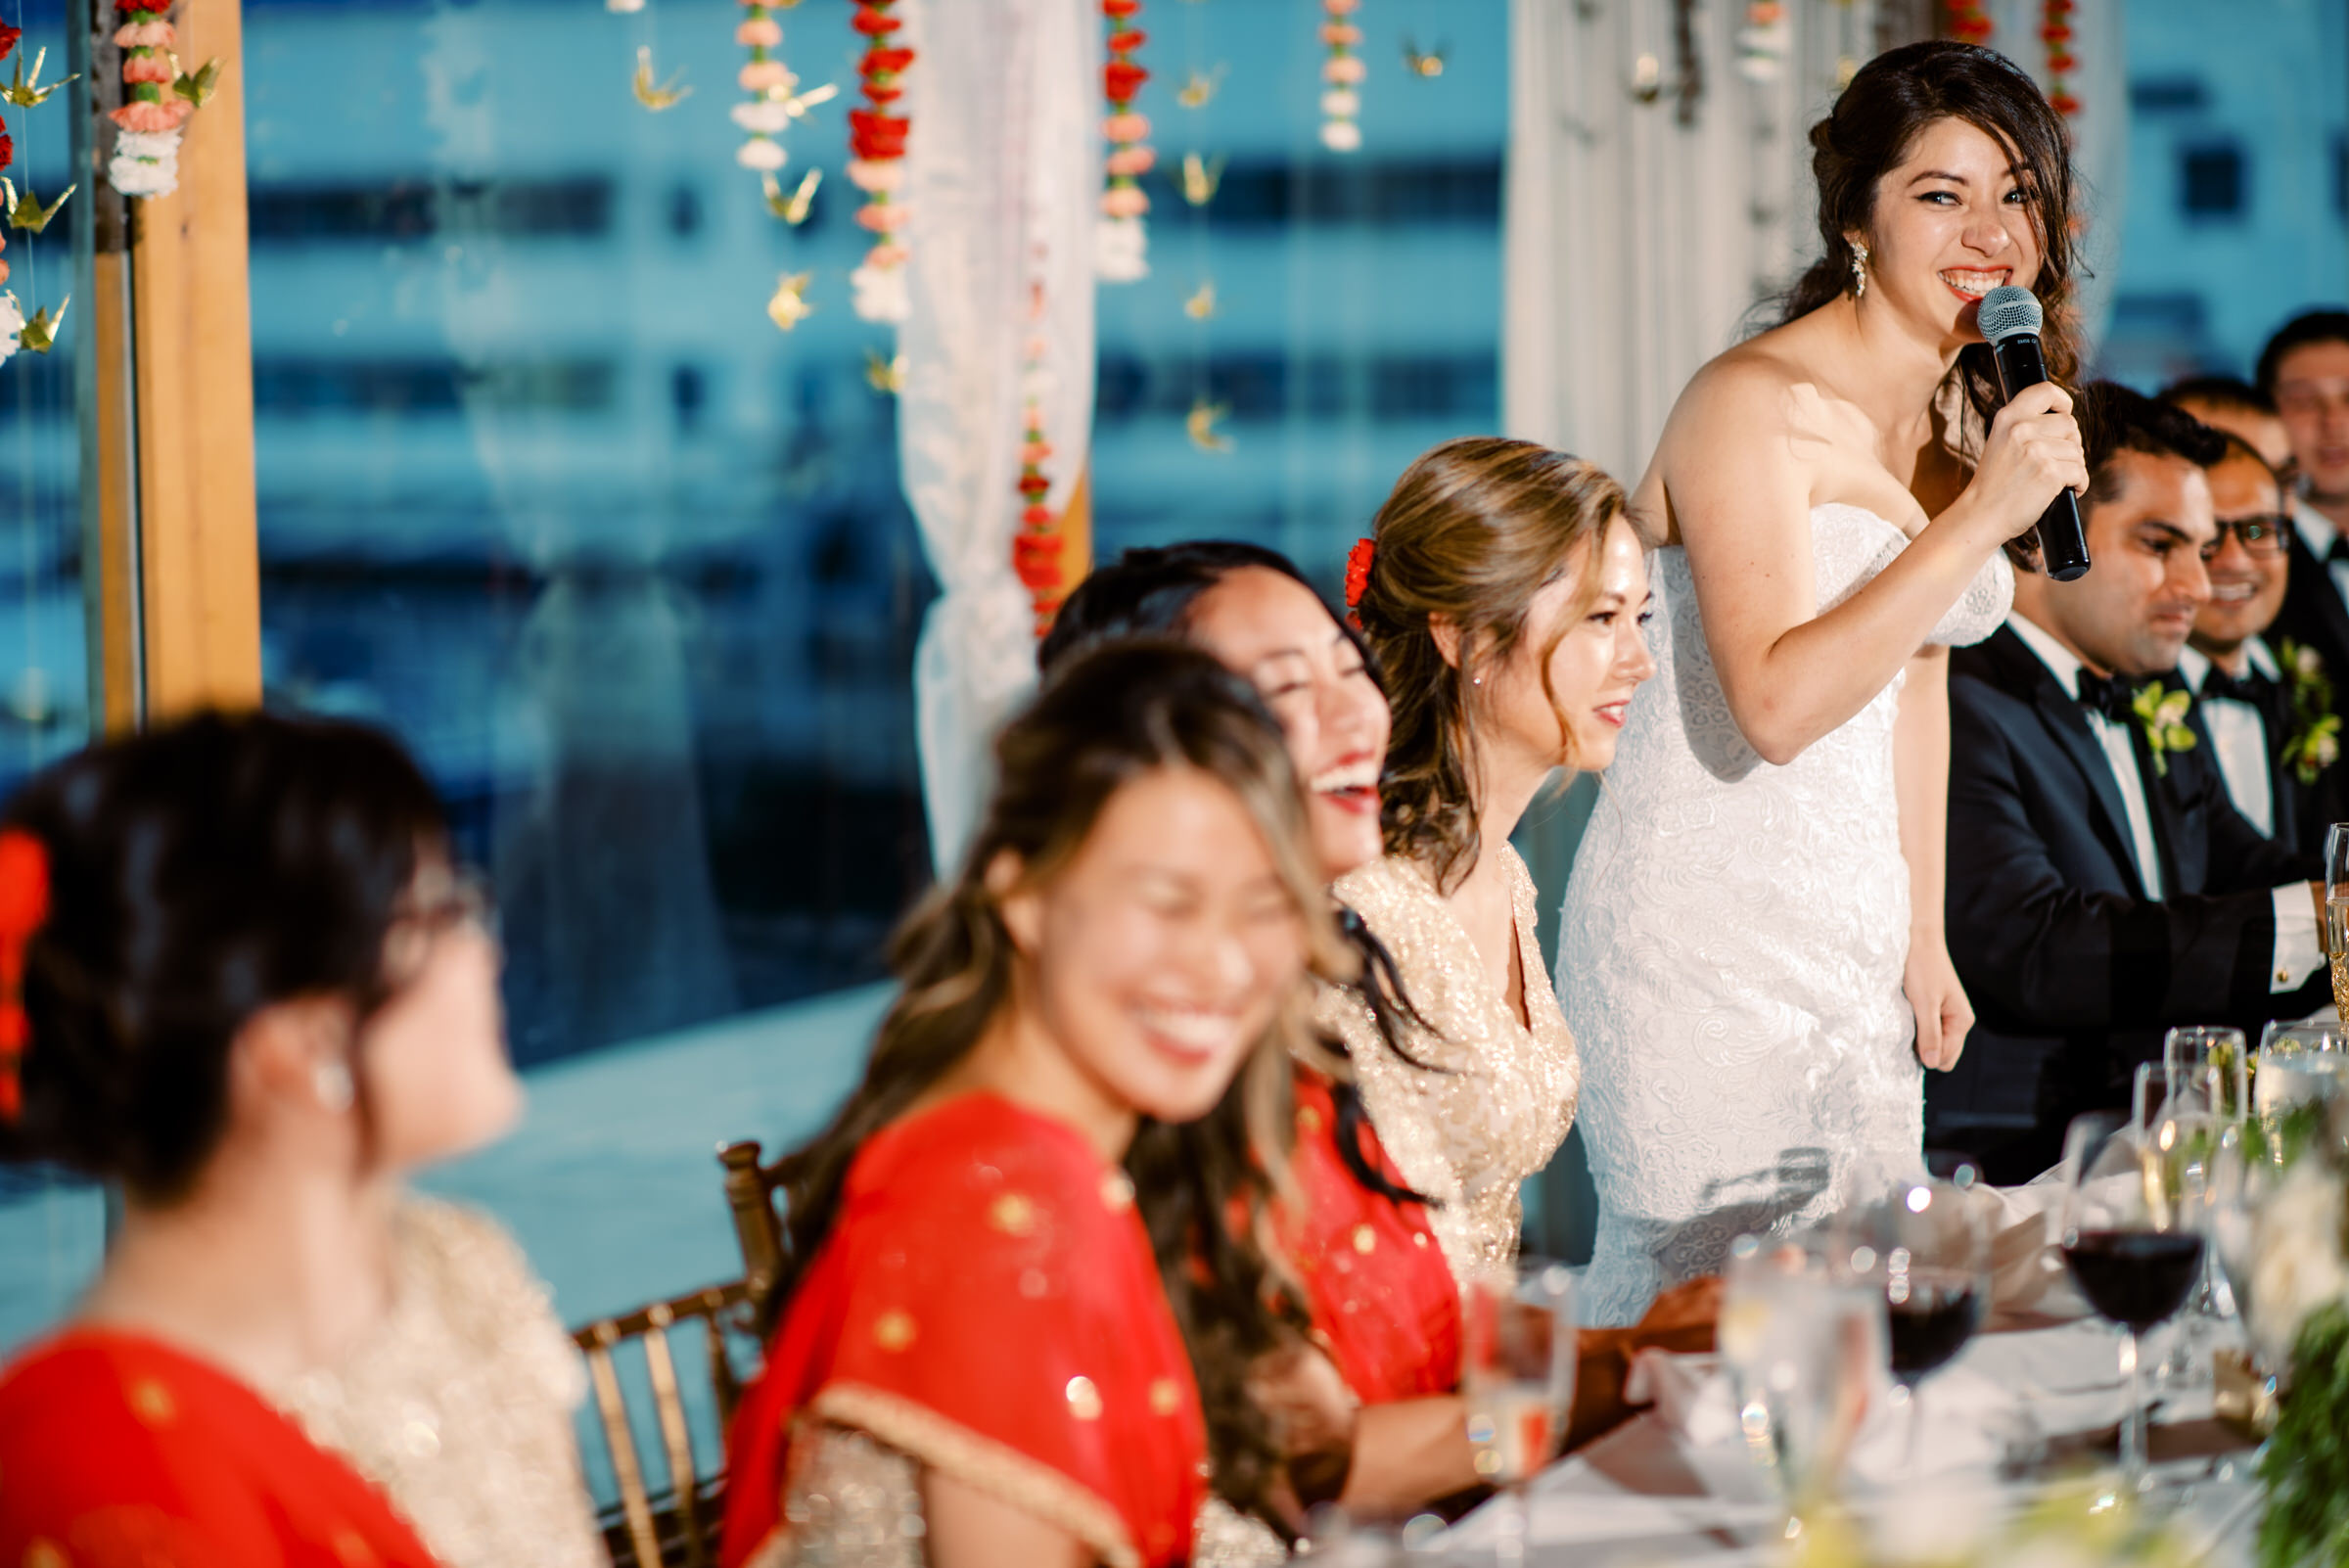 Bride gives a toast to her wedding party